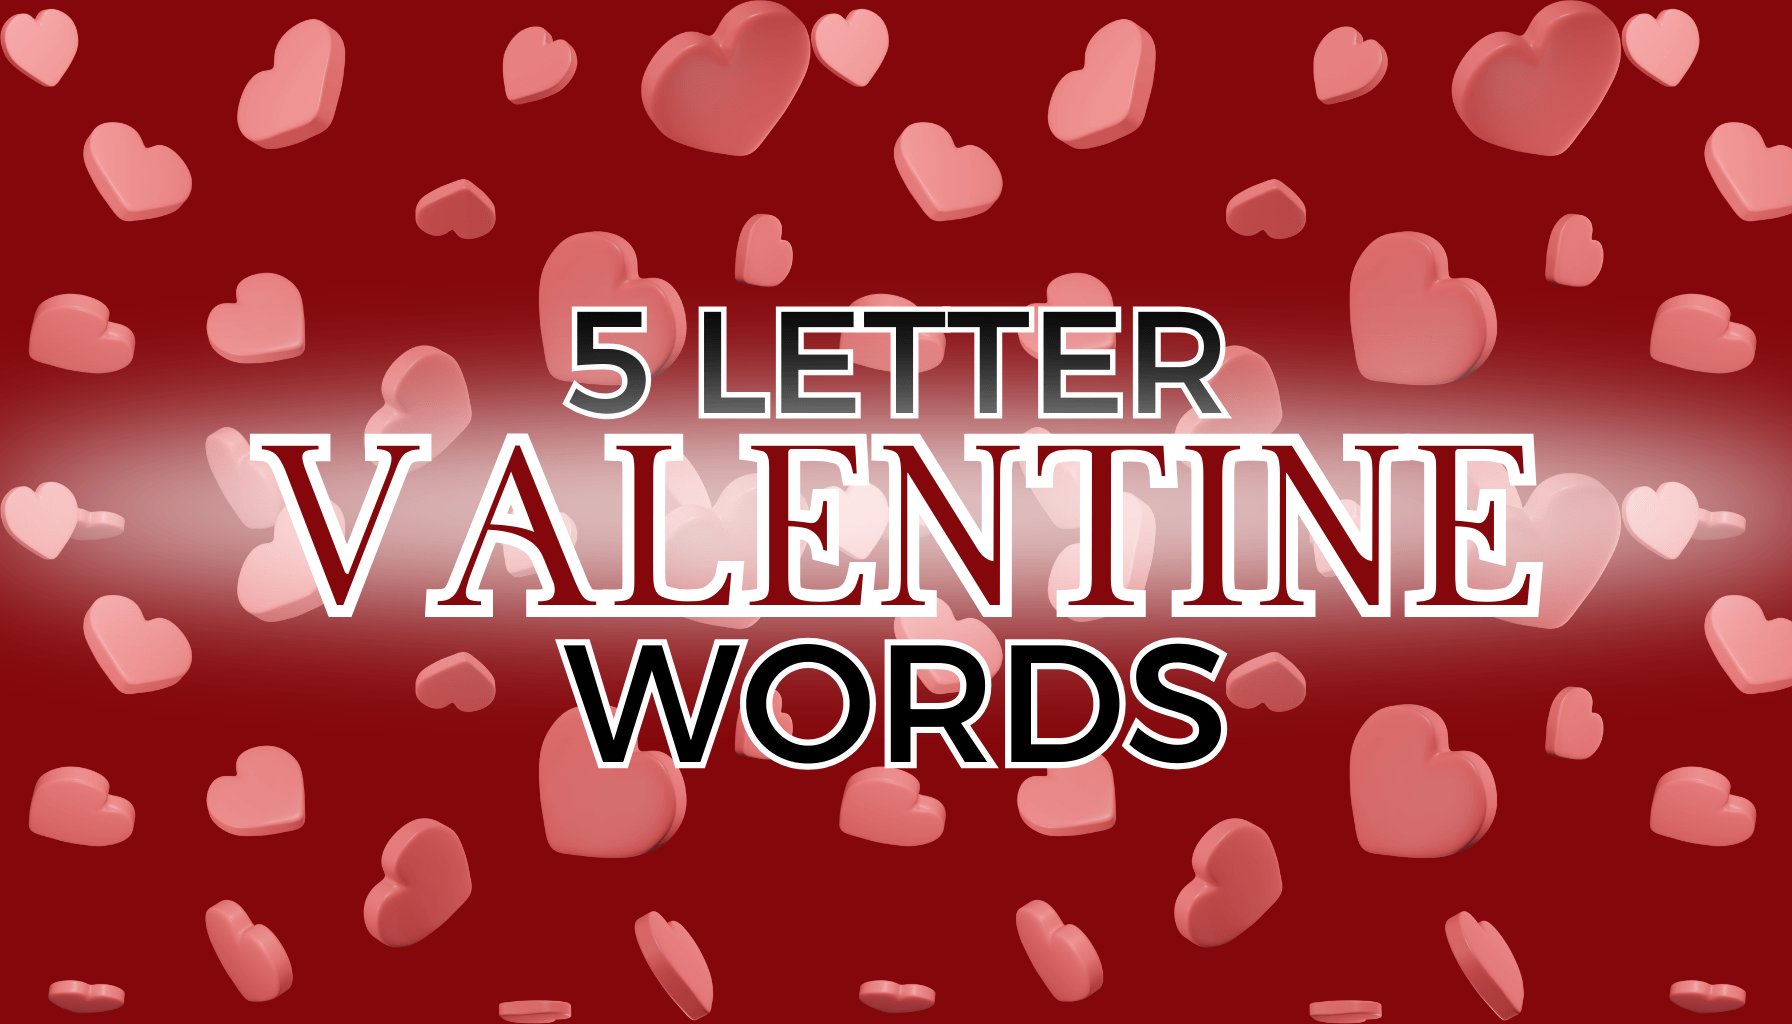 5 letter words for Valentine's day